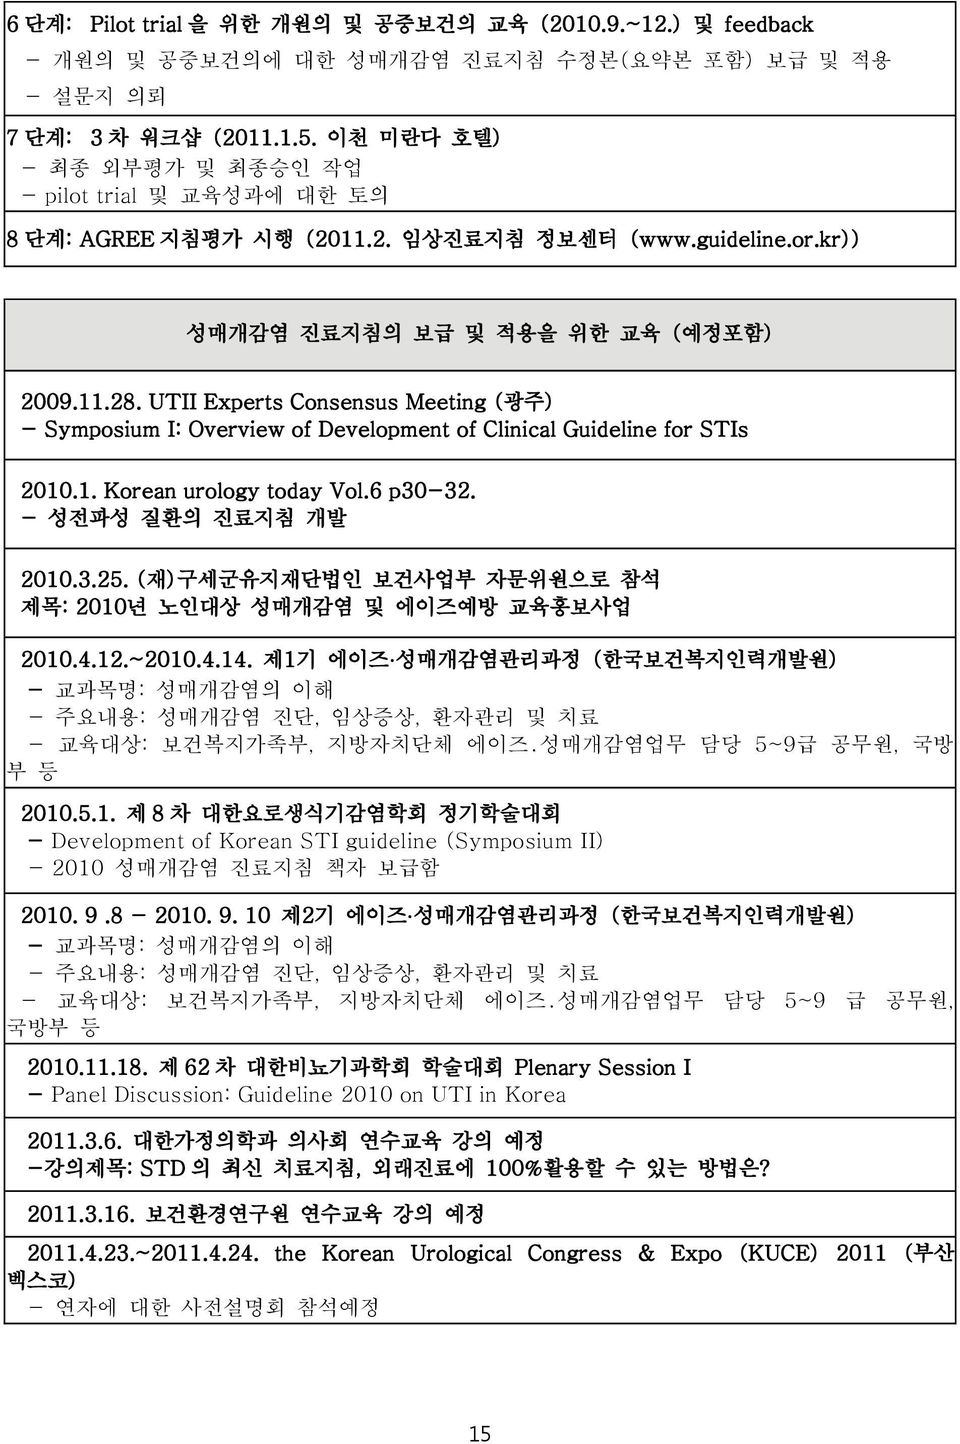 UTII Experts Consensus Meeting (광주) - Symposium I: Overview of Development of Clinical Guideline for STIs 2010.1. Korean urology today Vol.6 p30-32. - 성전파성 질환의 진료지침 개발 2010.3.25.